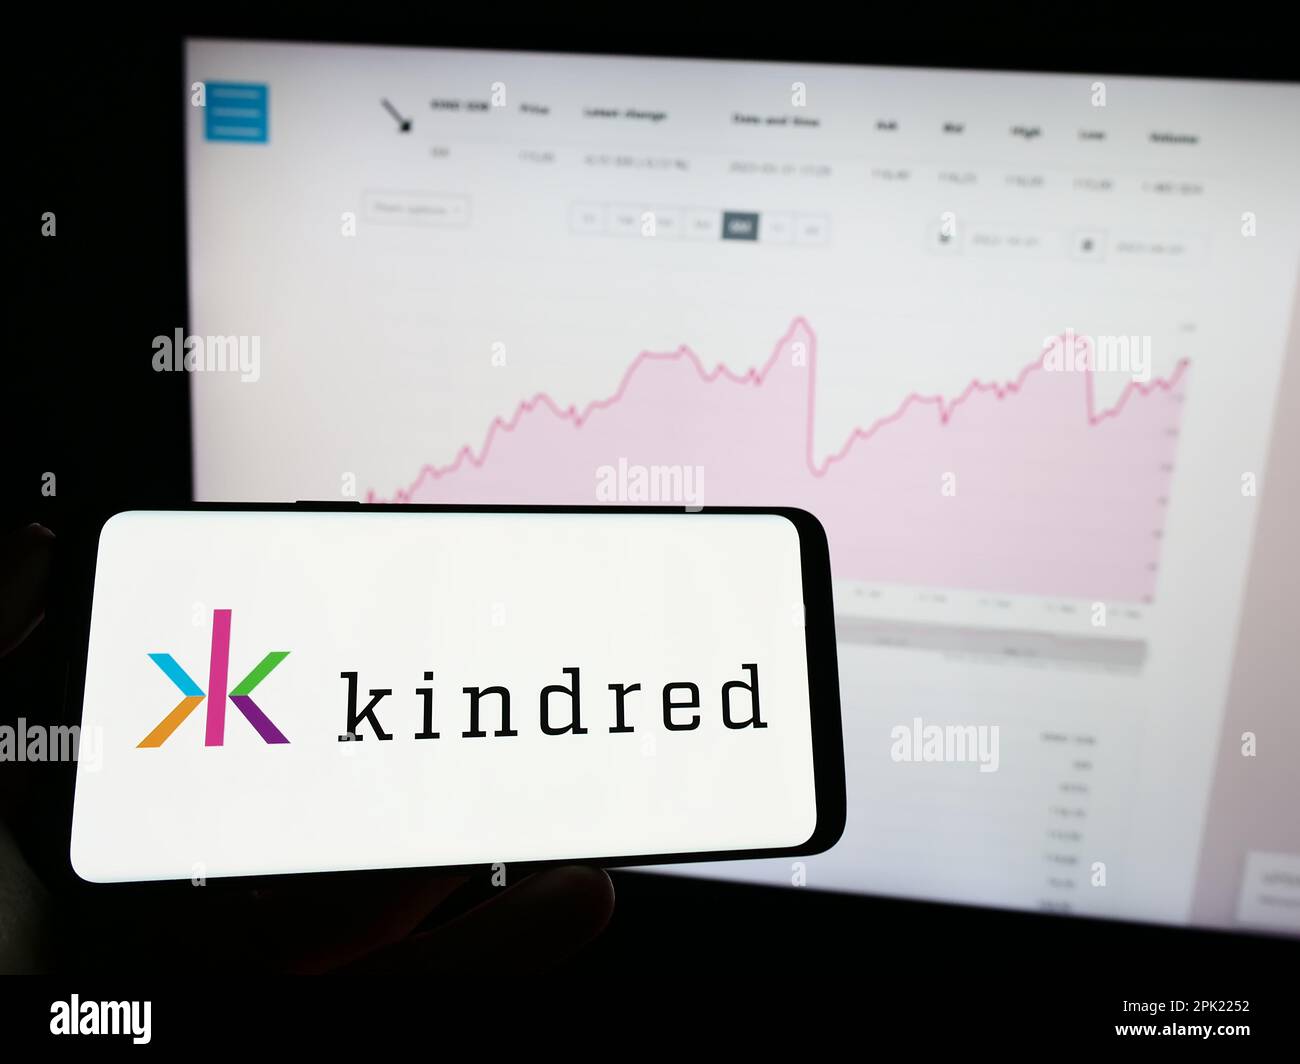 Person holding mobile phone with logo of online gambling company Kindred Group plc on screen in front of web page. Focus on phone display. Stock Photo